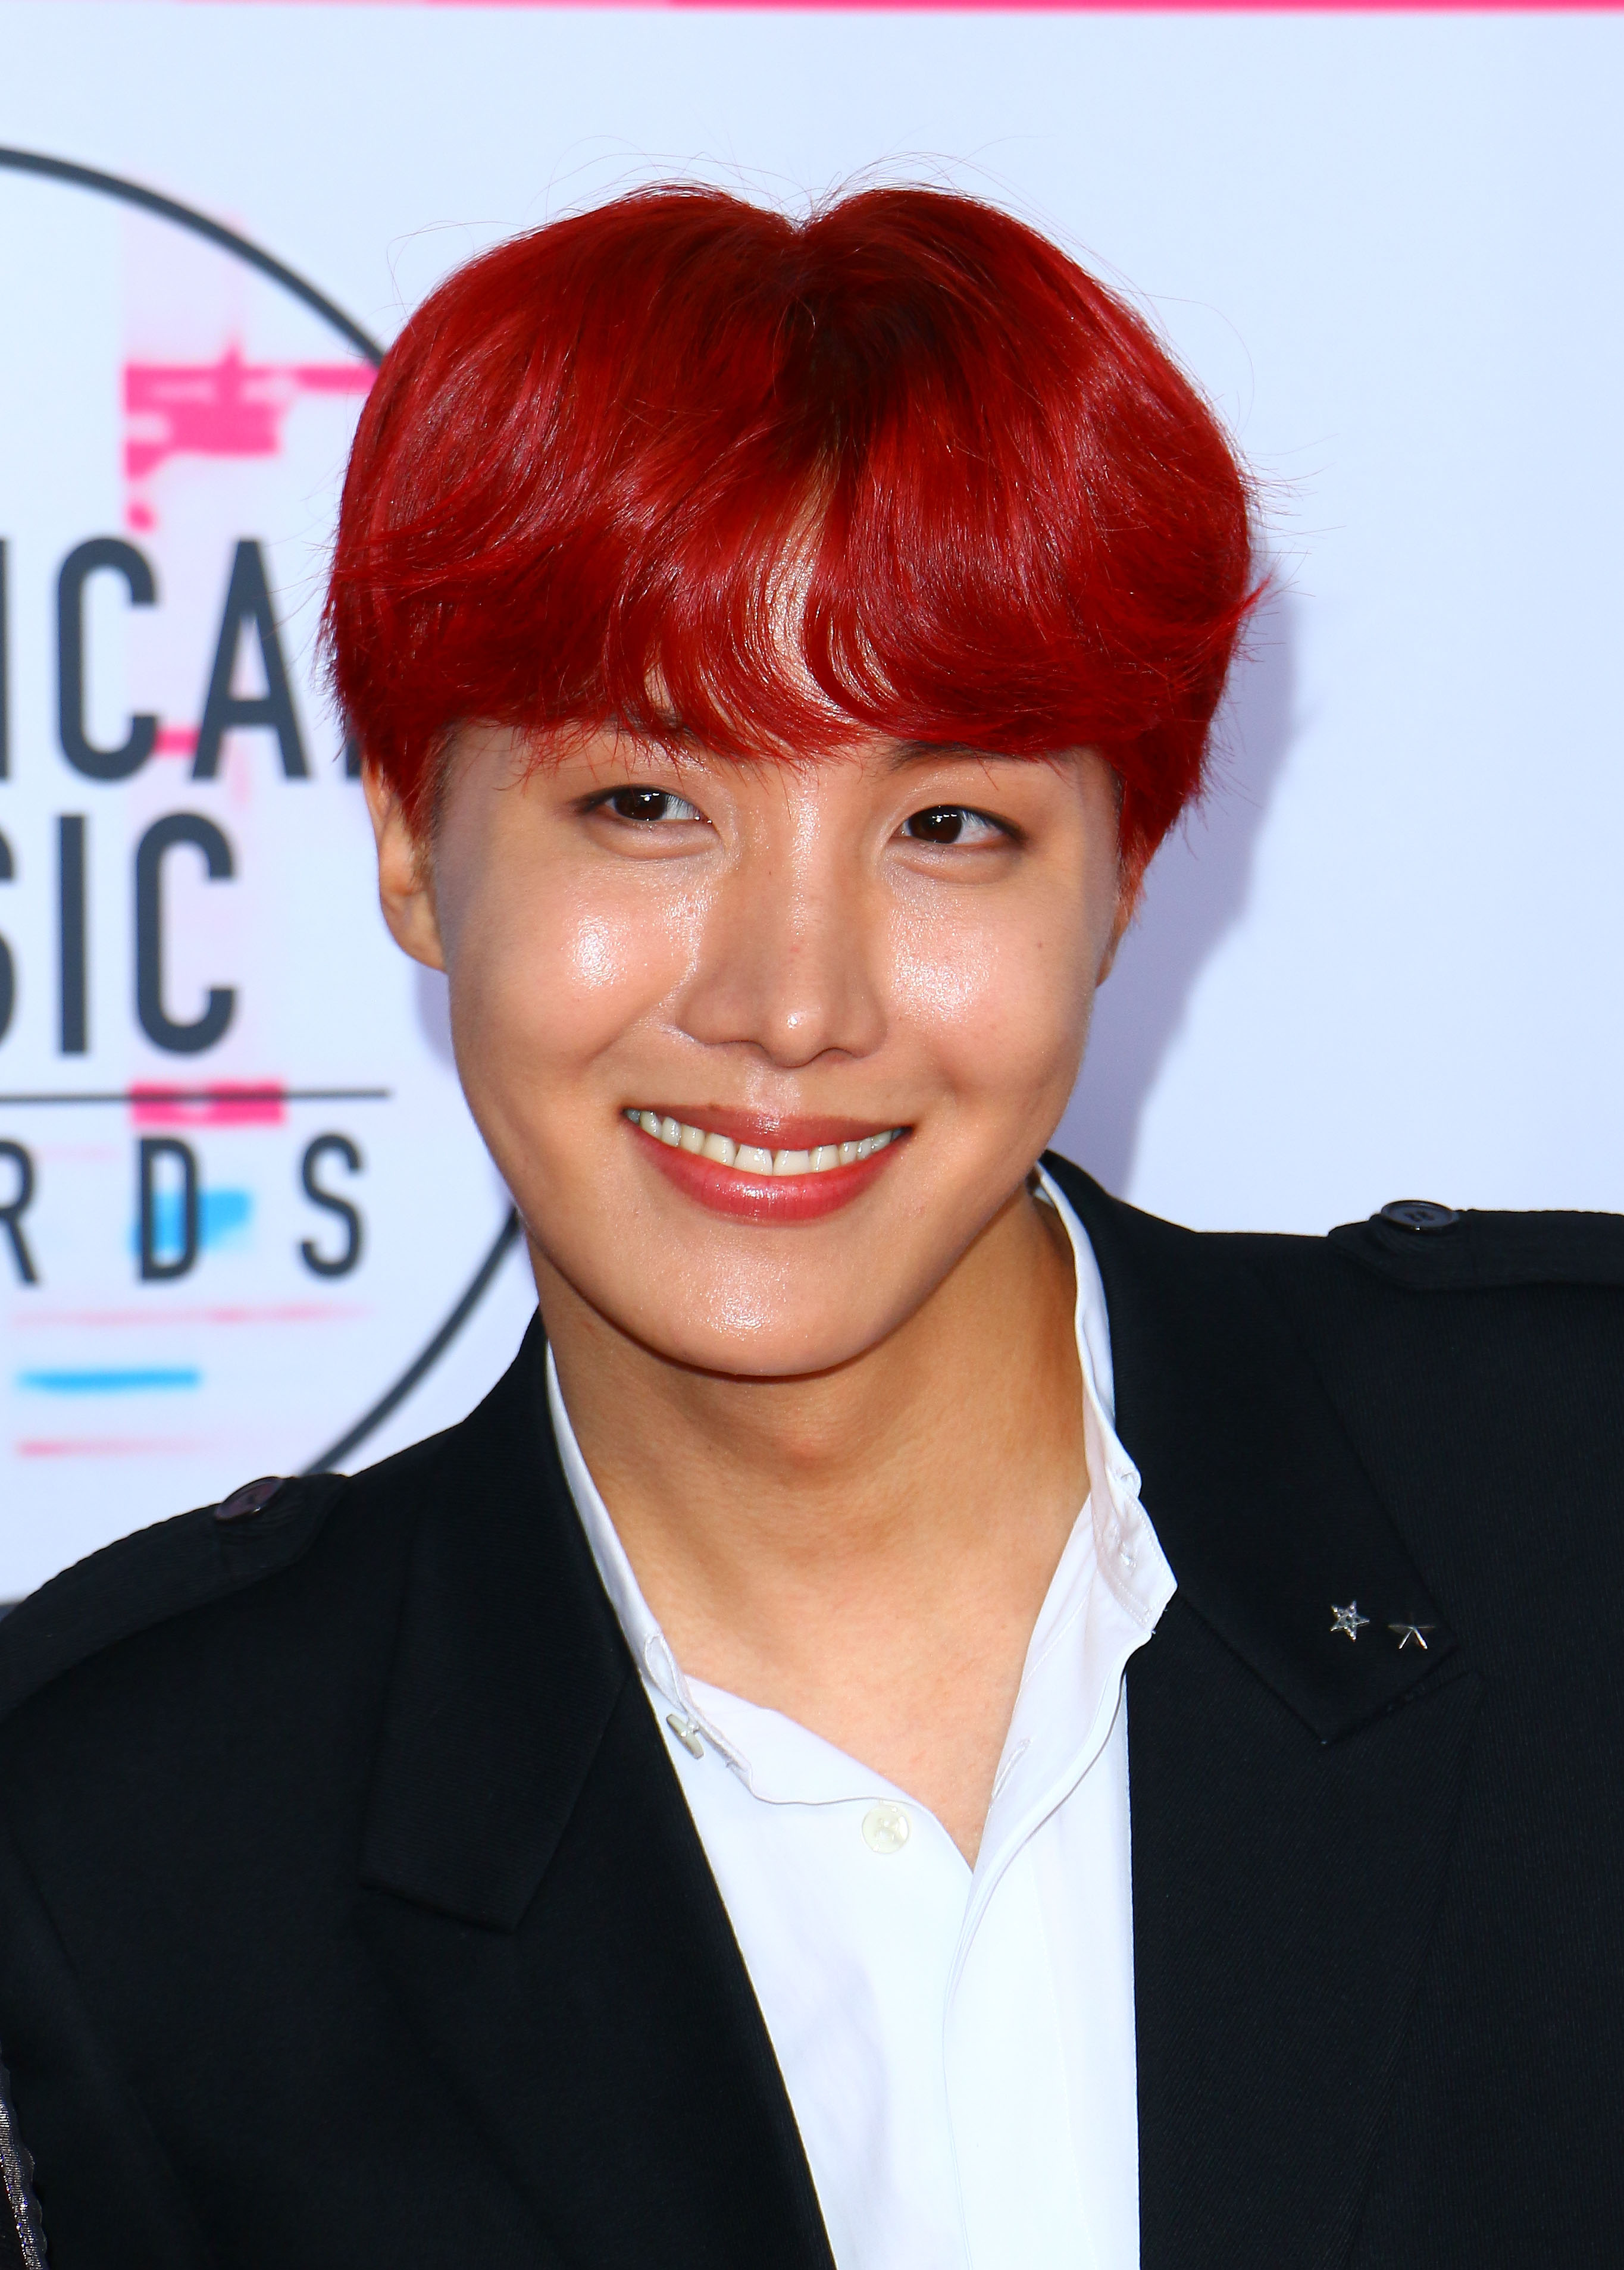 Watch BTS' J-Hope grow up in photos from 2013 to now, Korean News